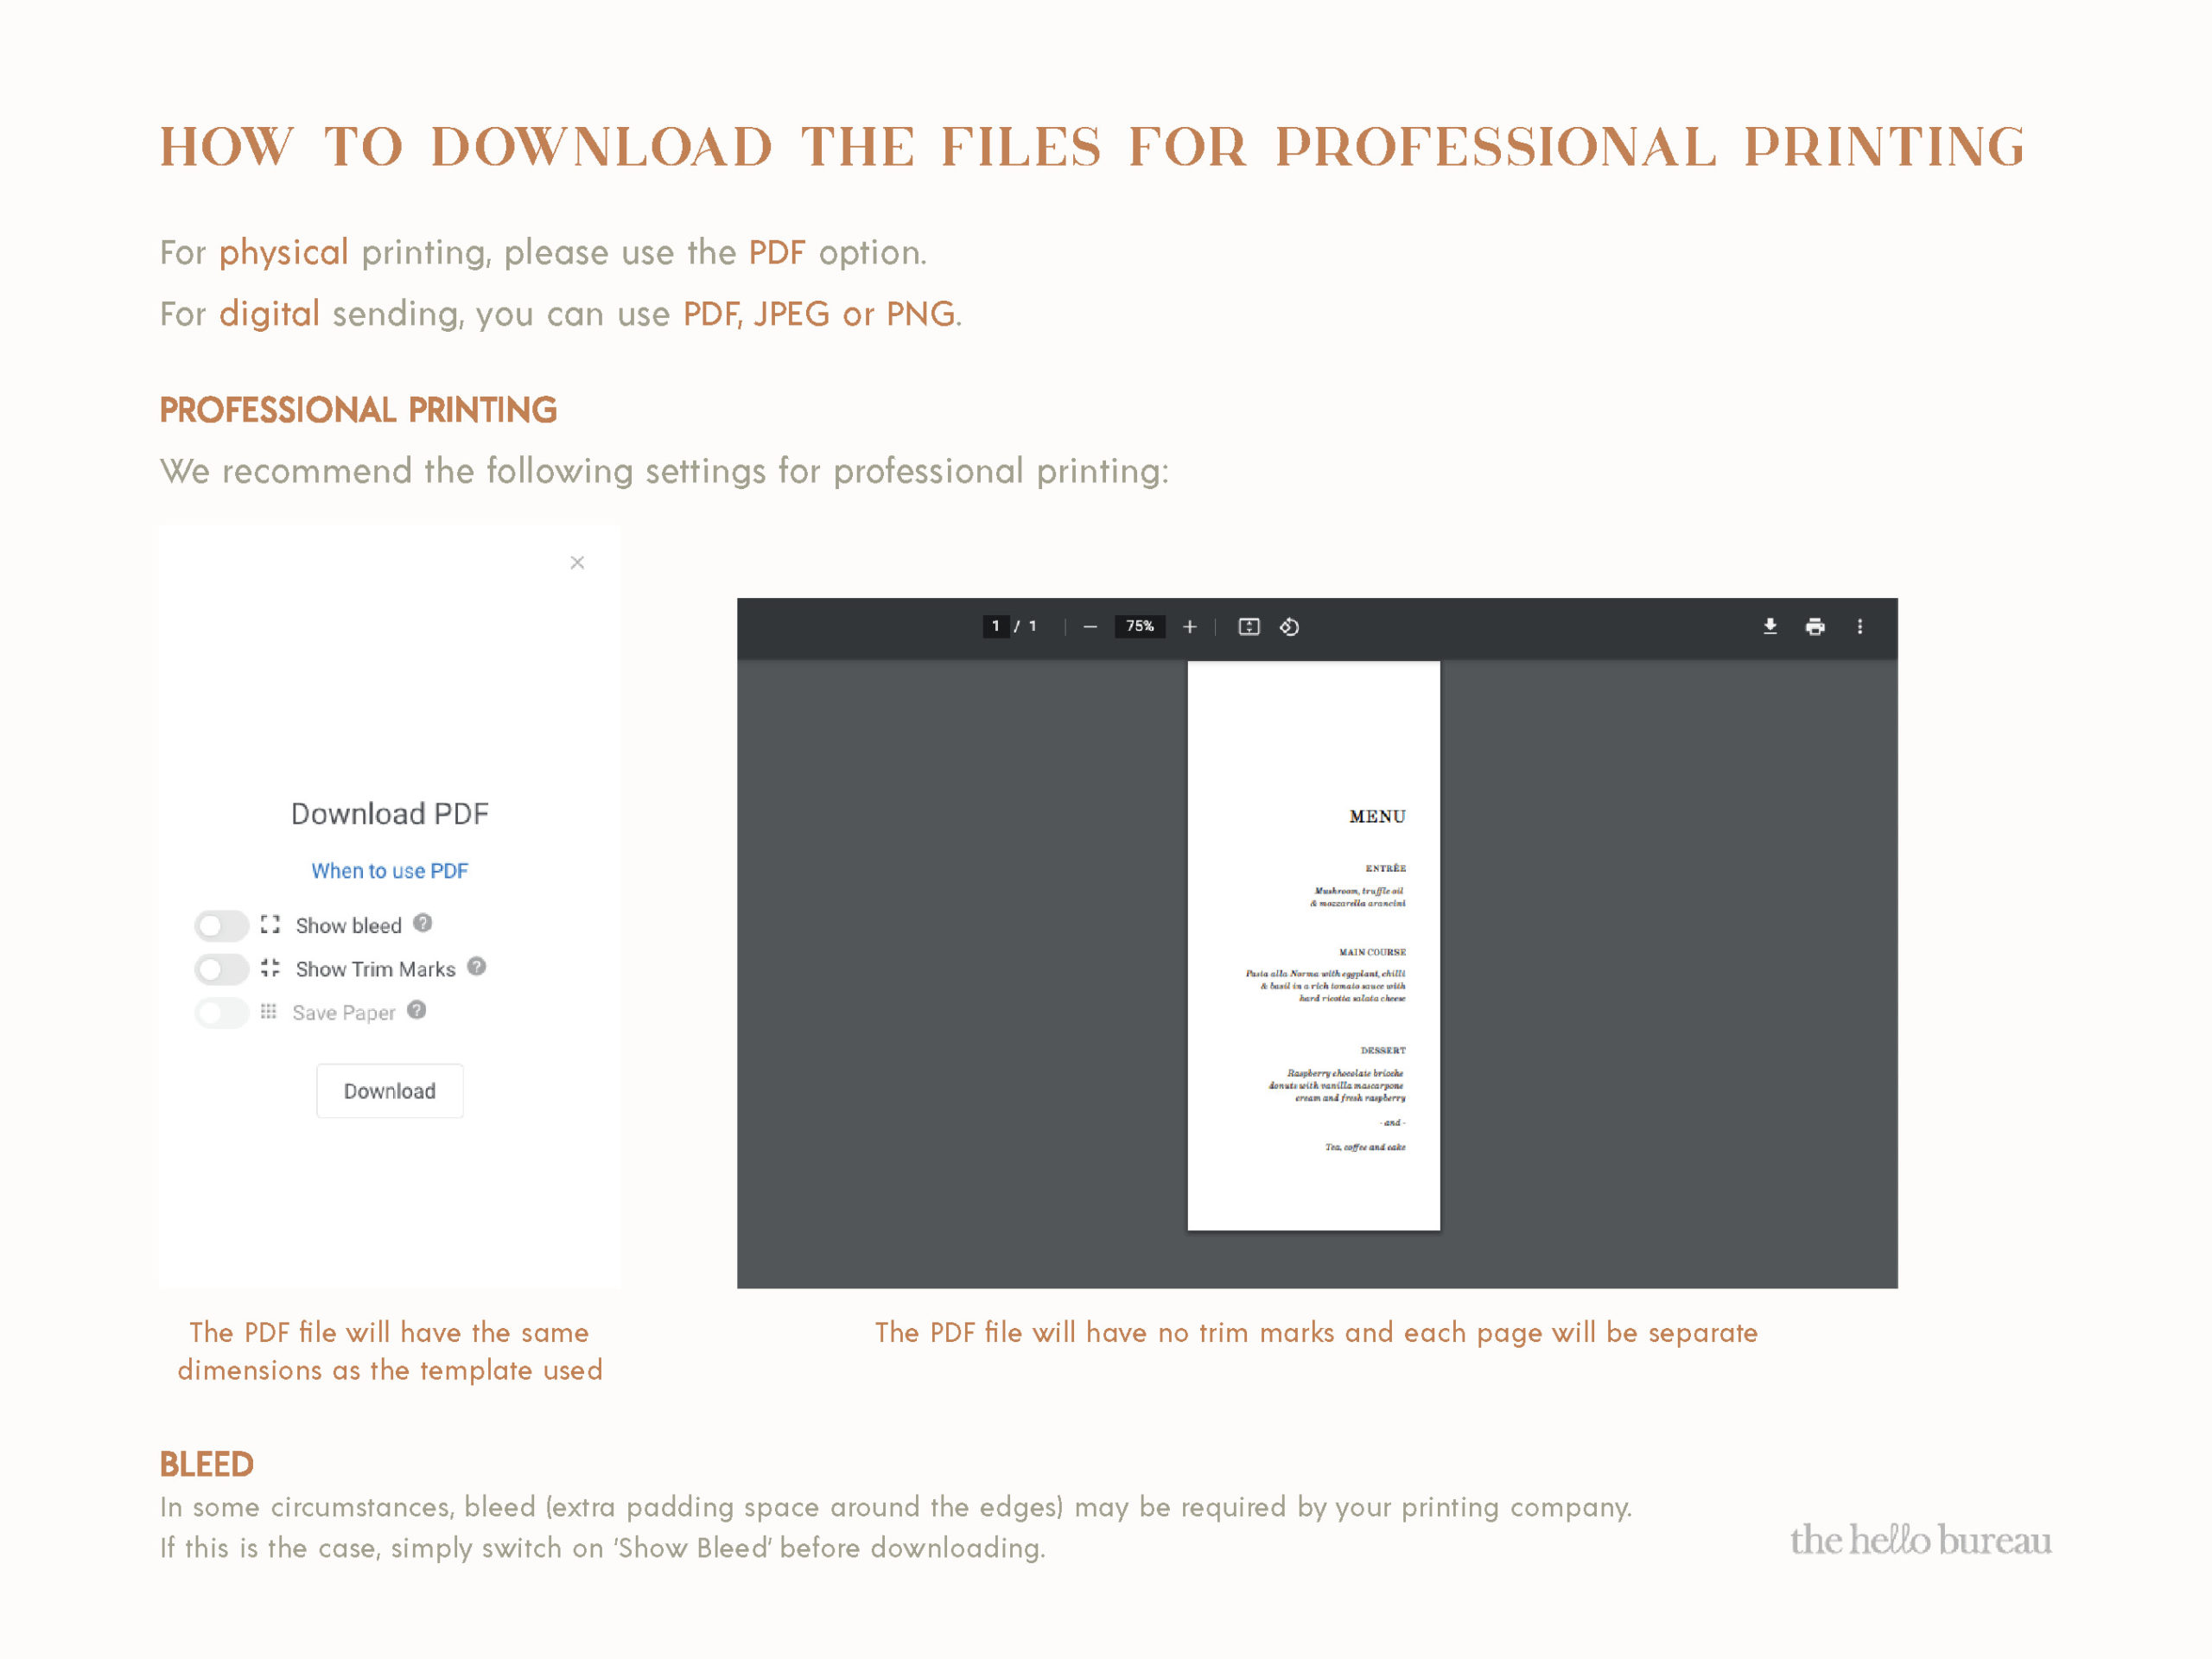 How to download Templett files for printing